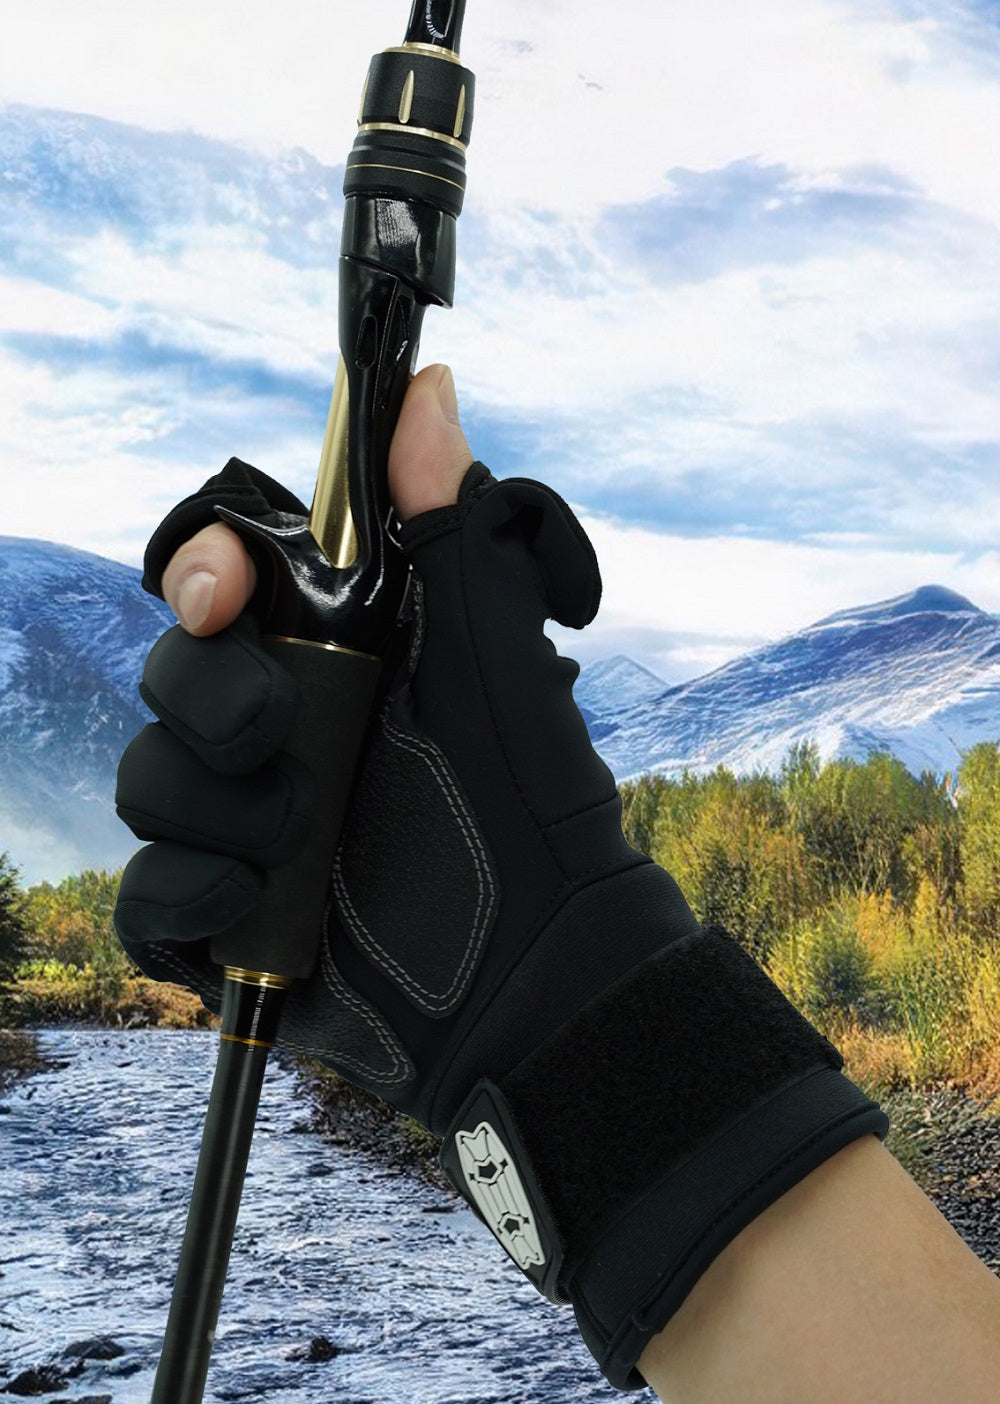 Seibertron W.G.F.G 2.0 Water Resistant Winter Fishing Gloves with Magn